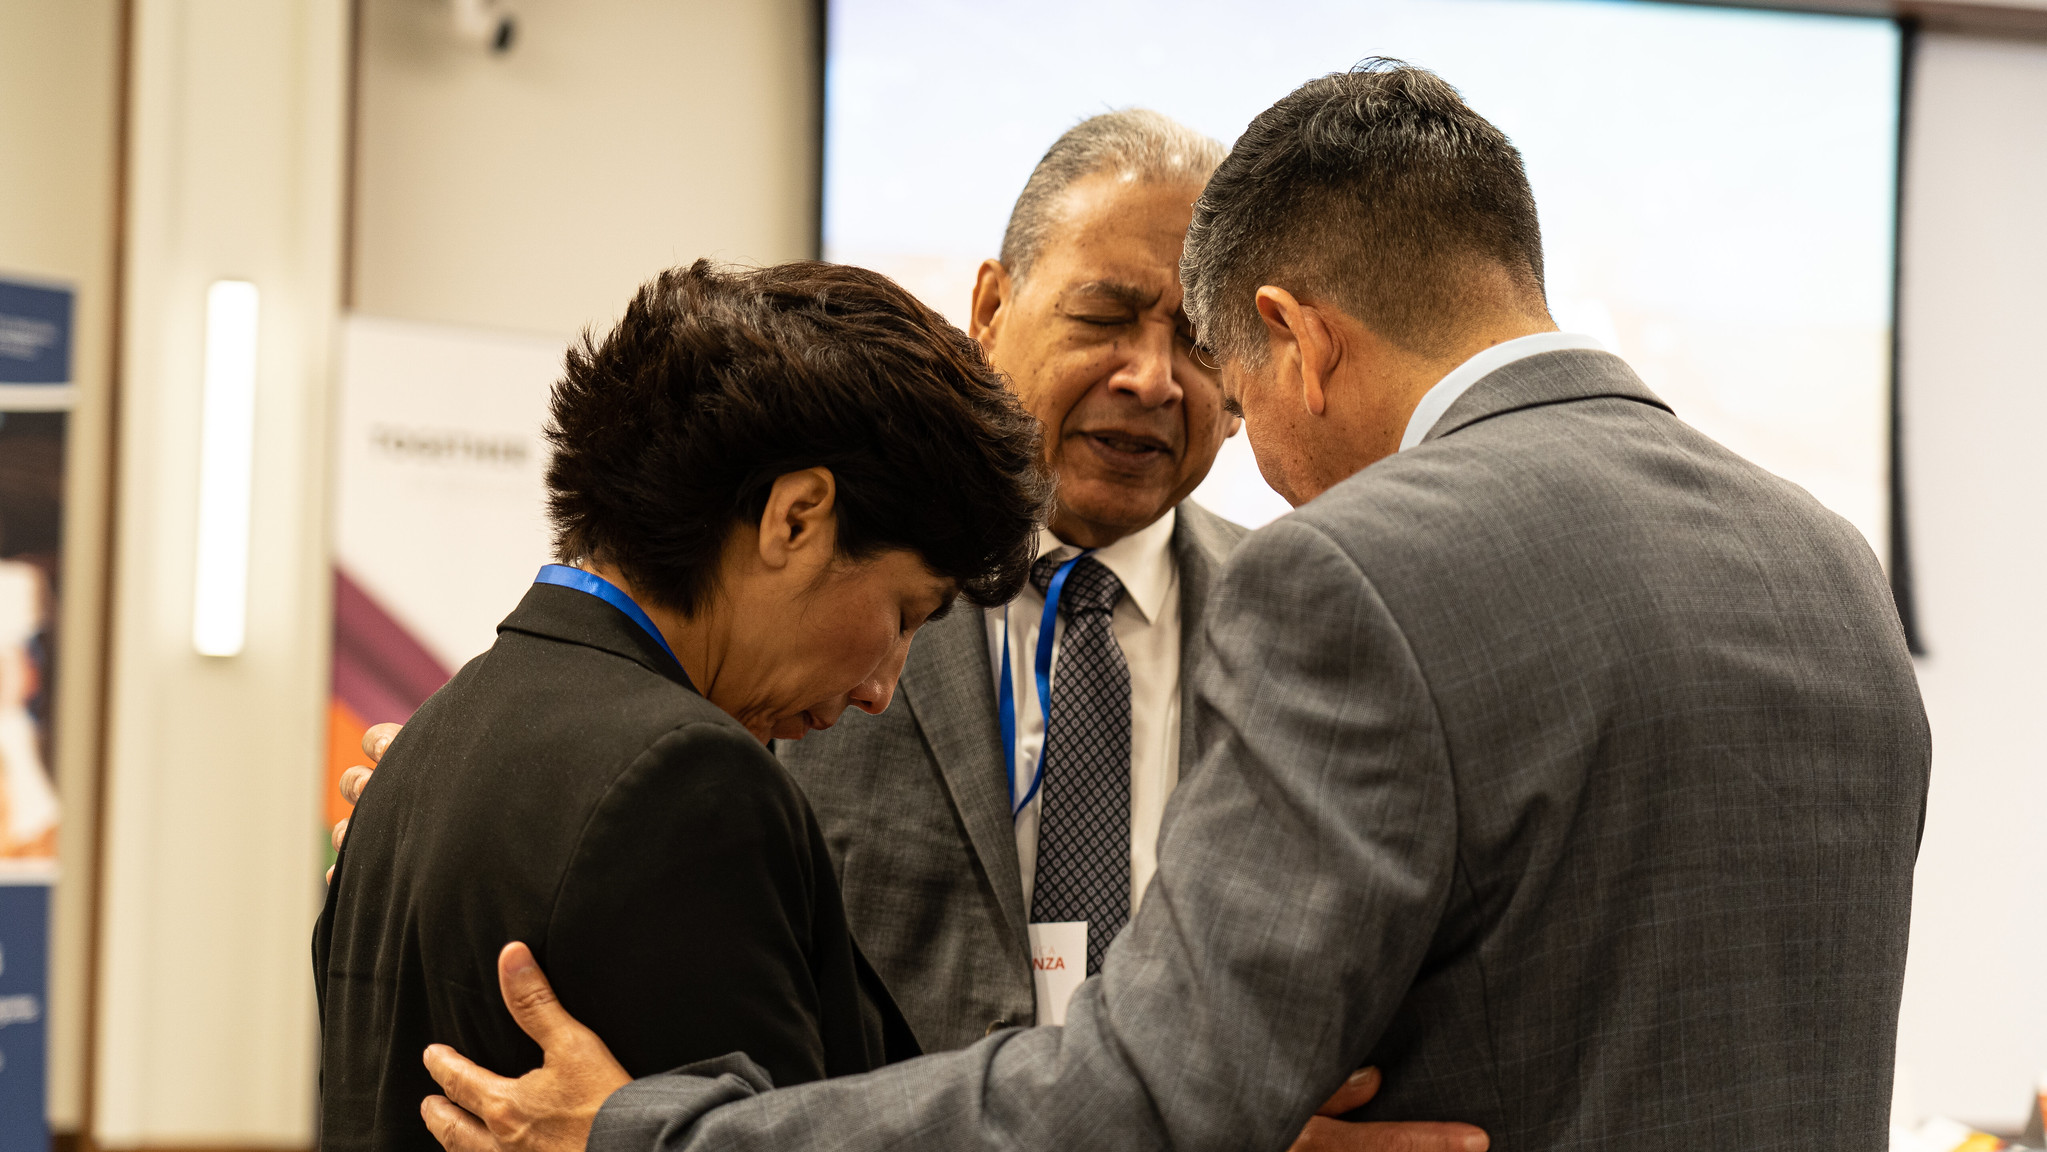 Hispanic Ministries coordinators pray for each other during worship on Tuesday morning. Photo by Art Brondo/NAD